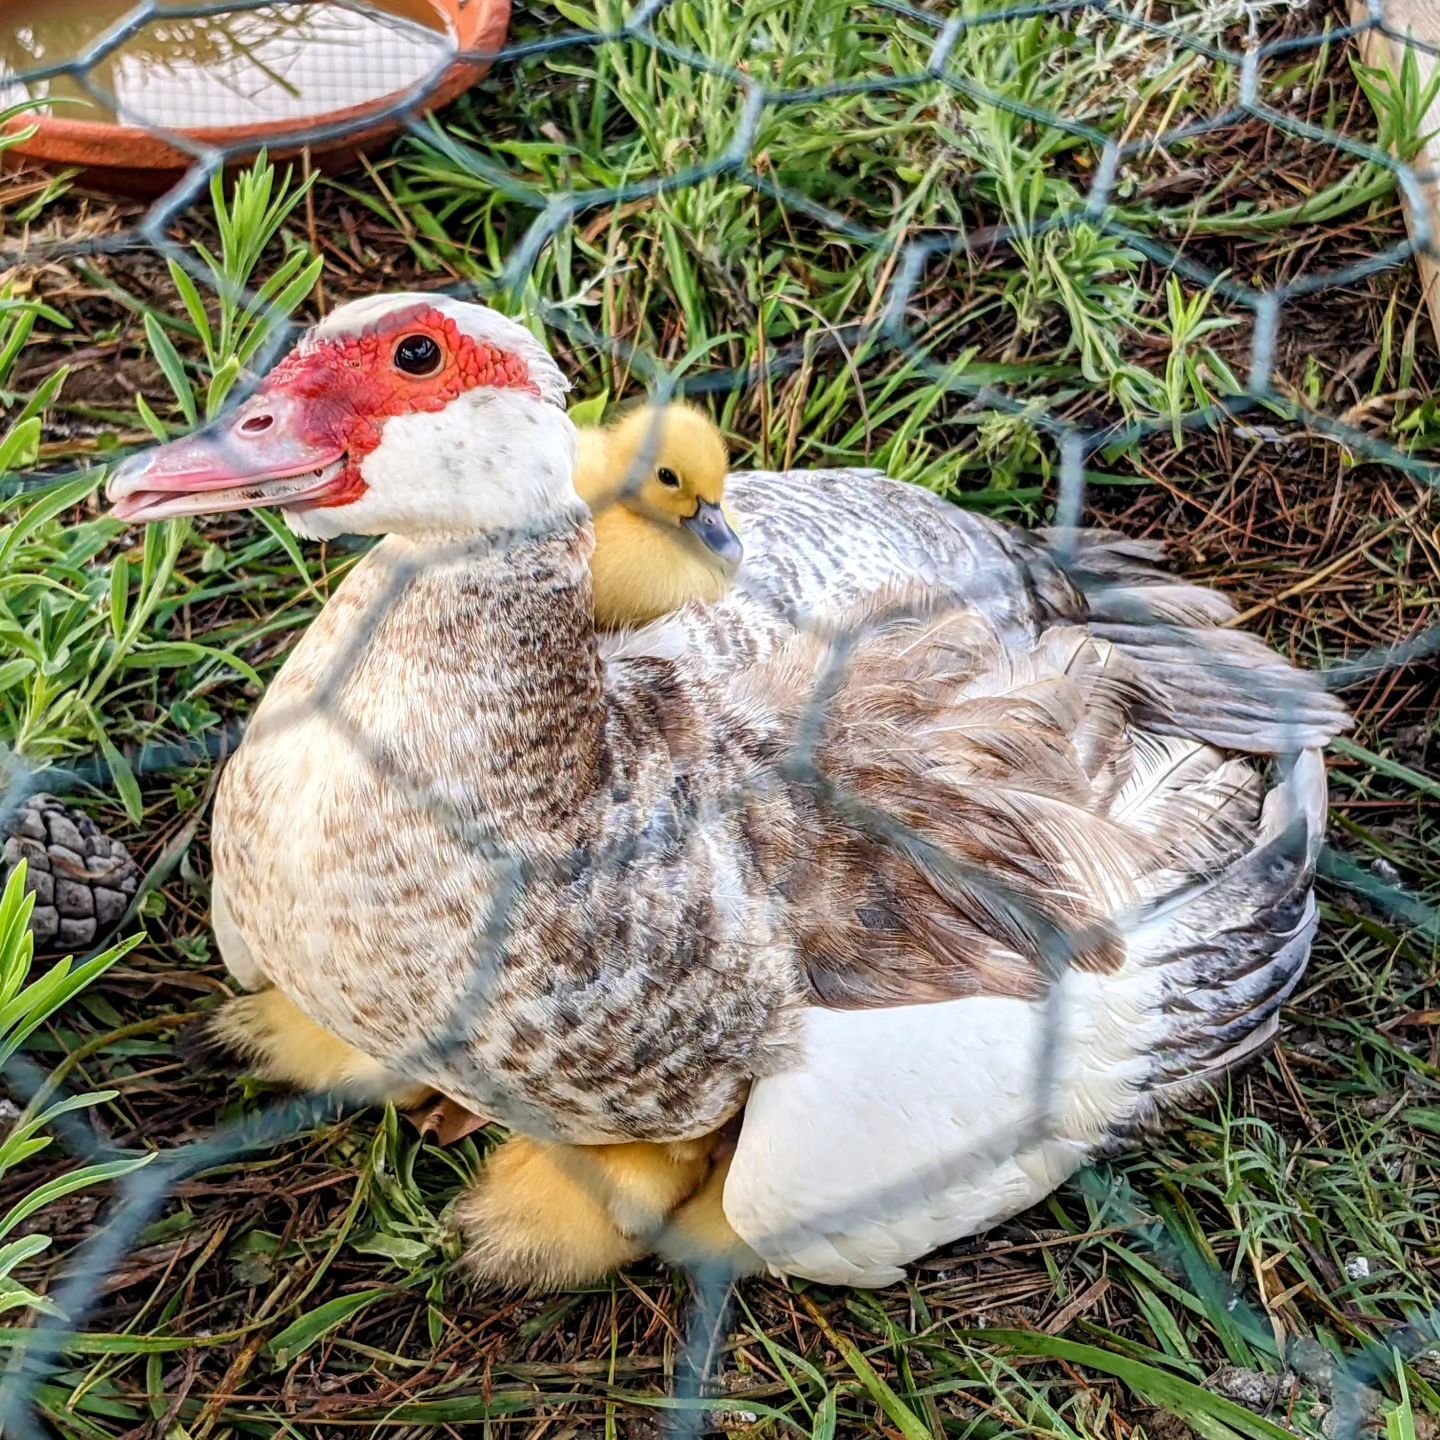 Muscovy ducklings chilling and/or warming up with mommy